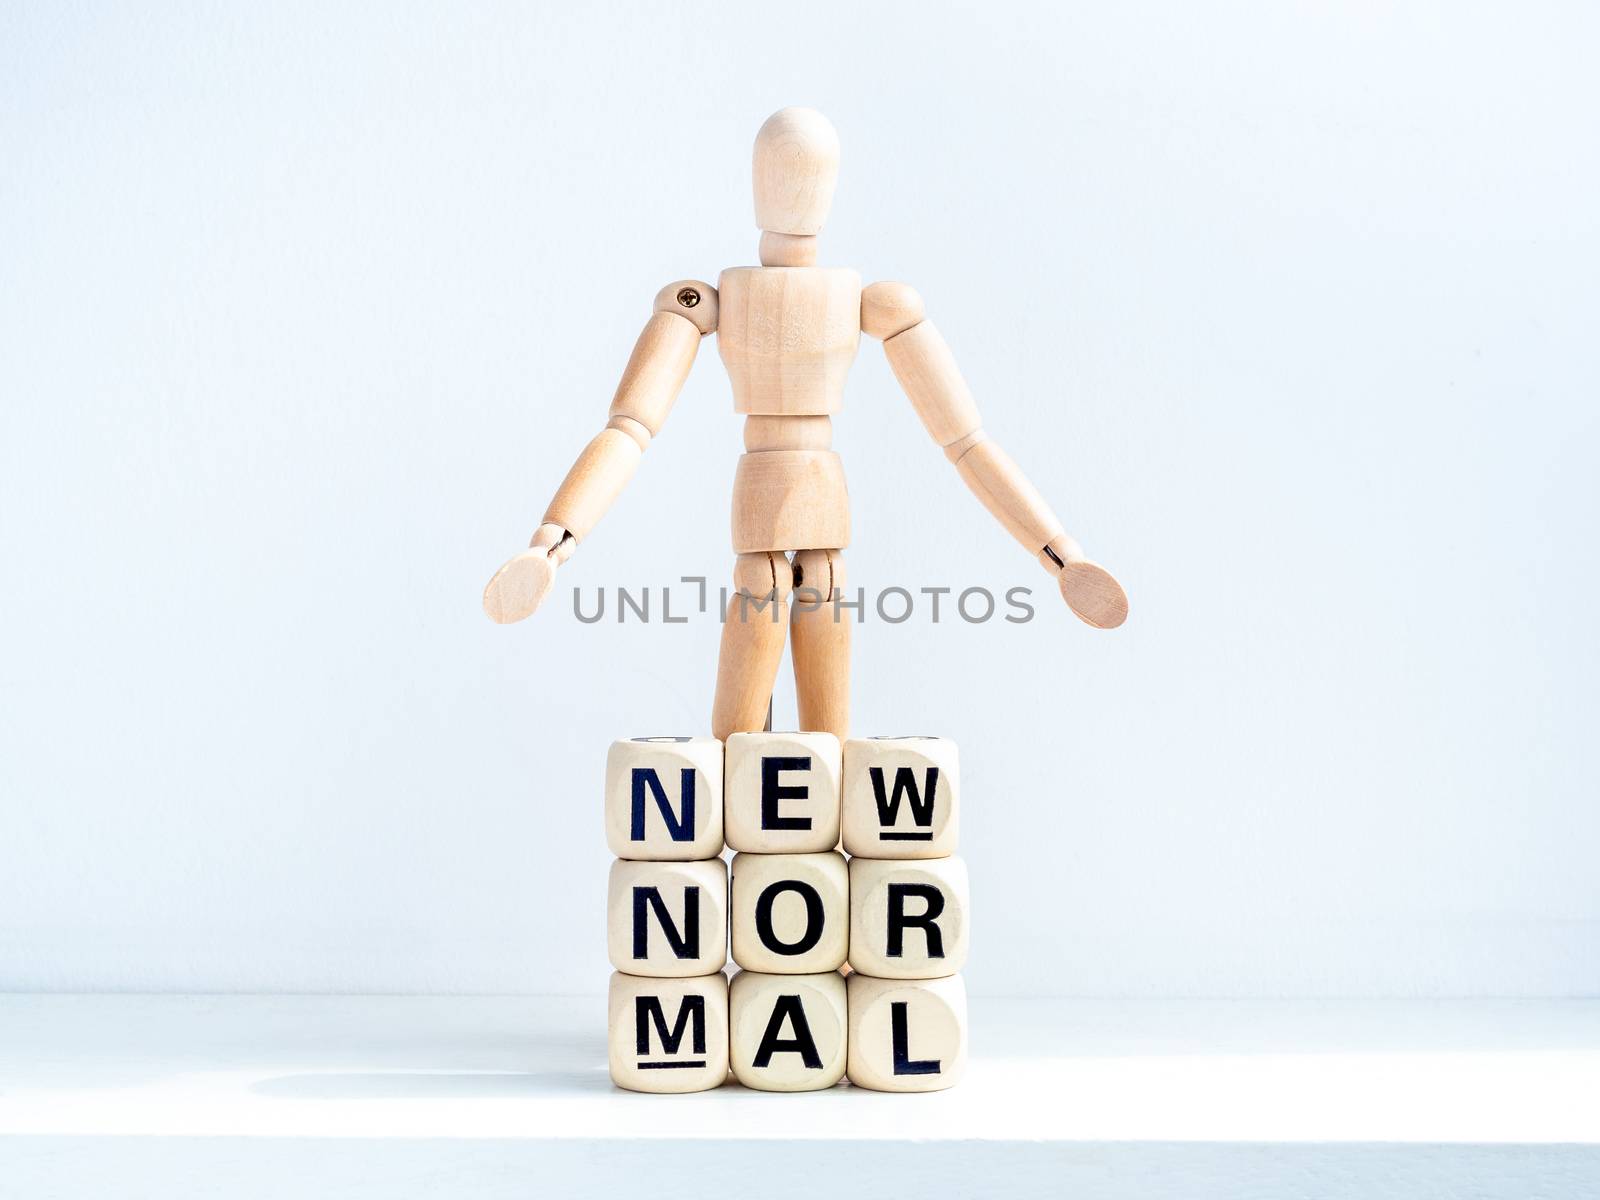 New Normal, words on wooden alphabet cube and wooden figure on white background. New normal life after covid-19 pandemic concept.